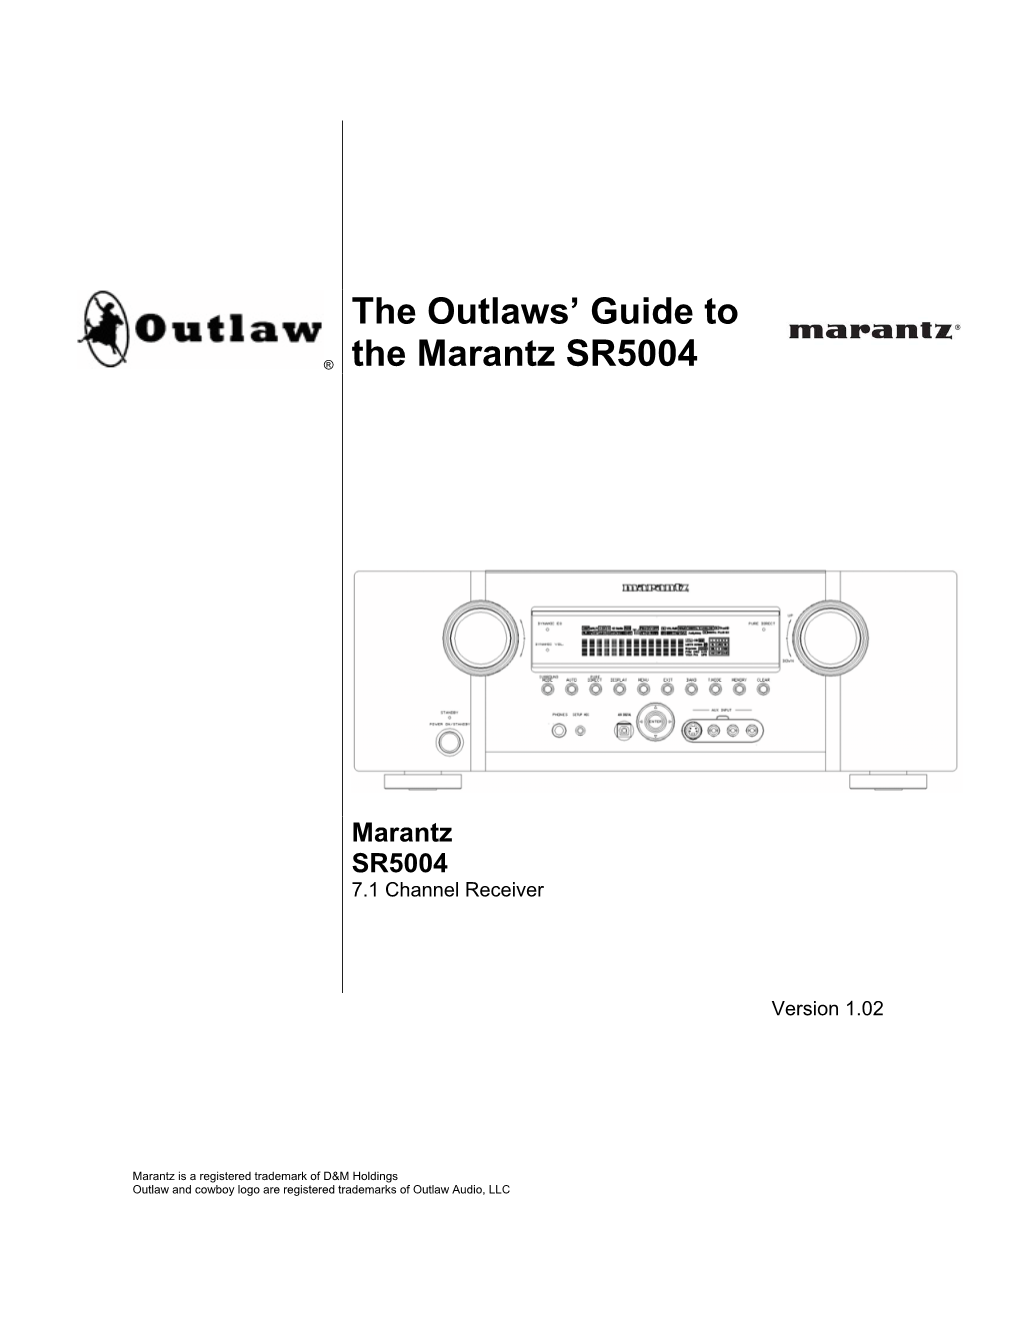 The Outlaws' Guide to the Marantz SR5004